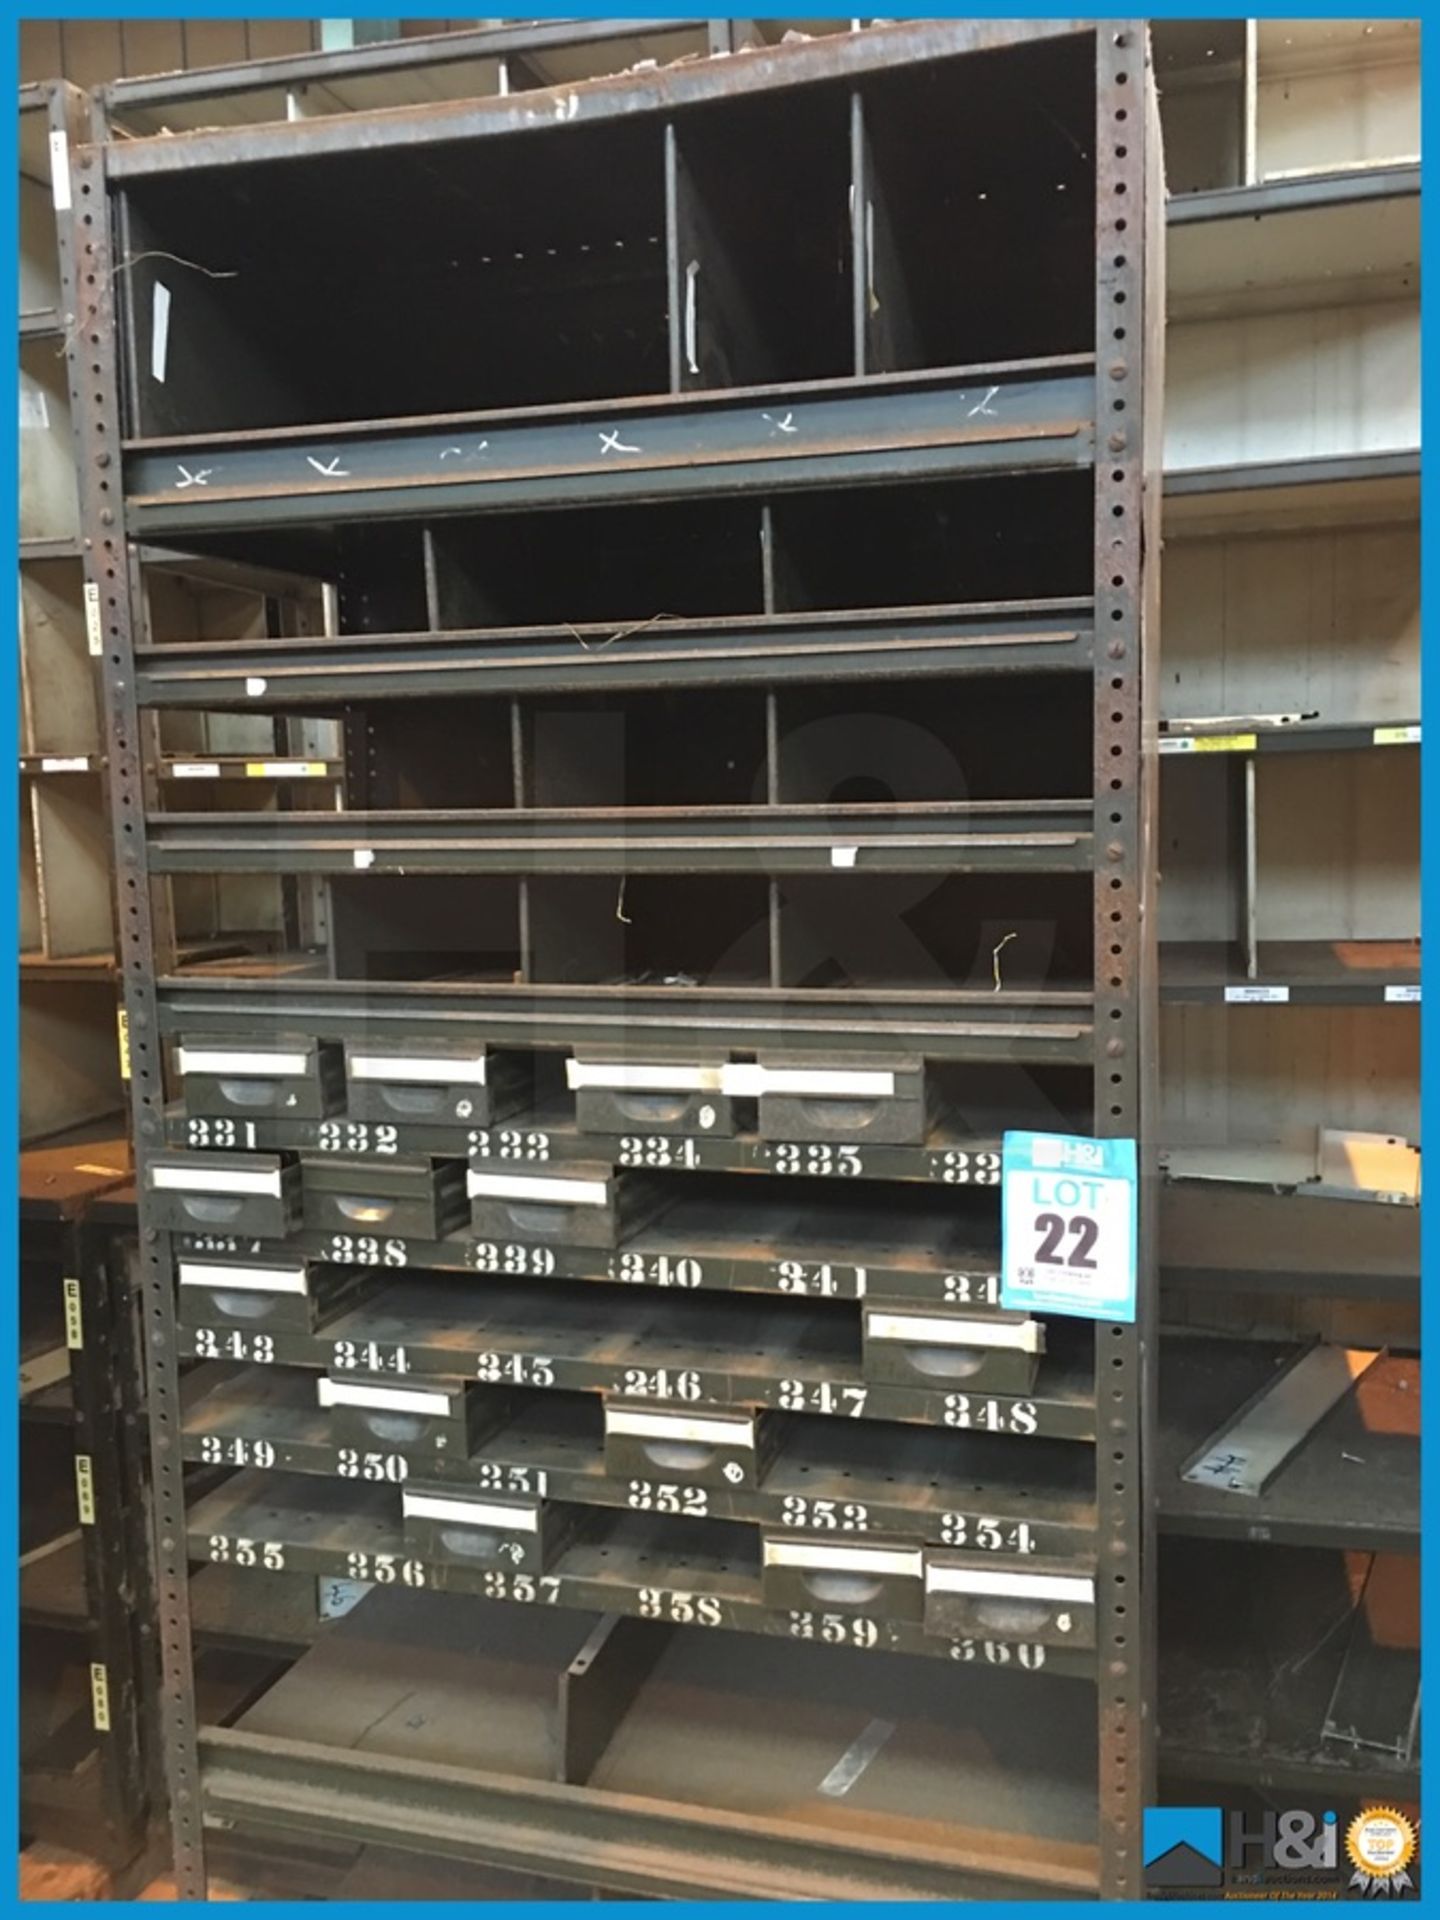 Large metal storage units with drawers and shelves. Very industrial appearance. Approx 7ft x 3ft x